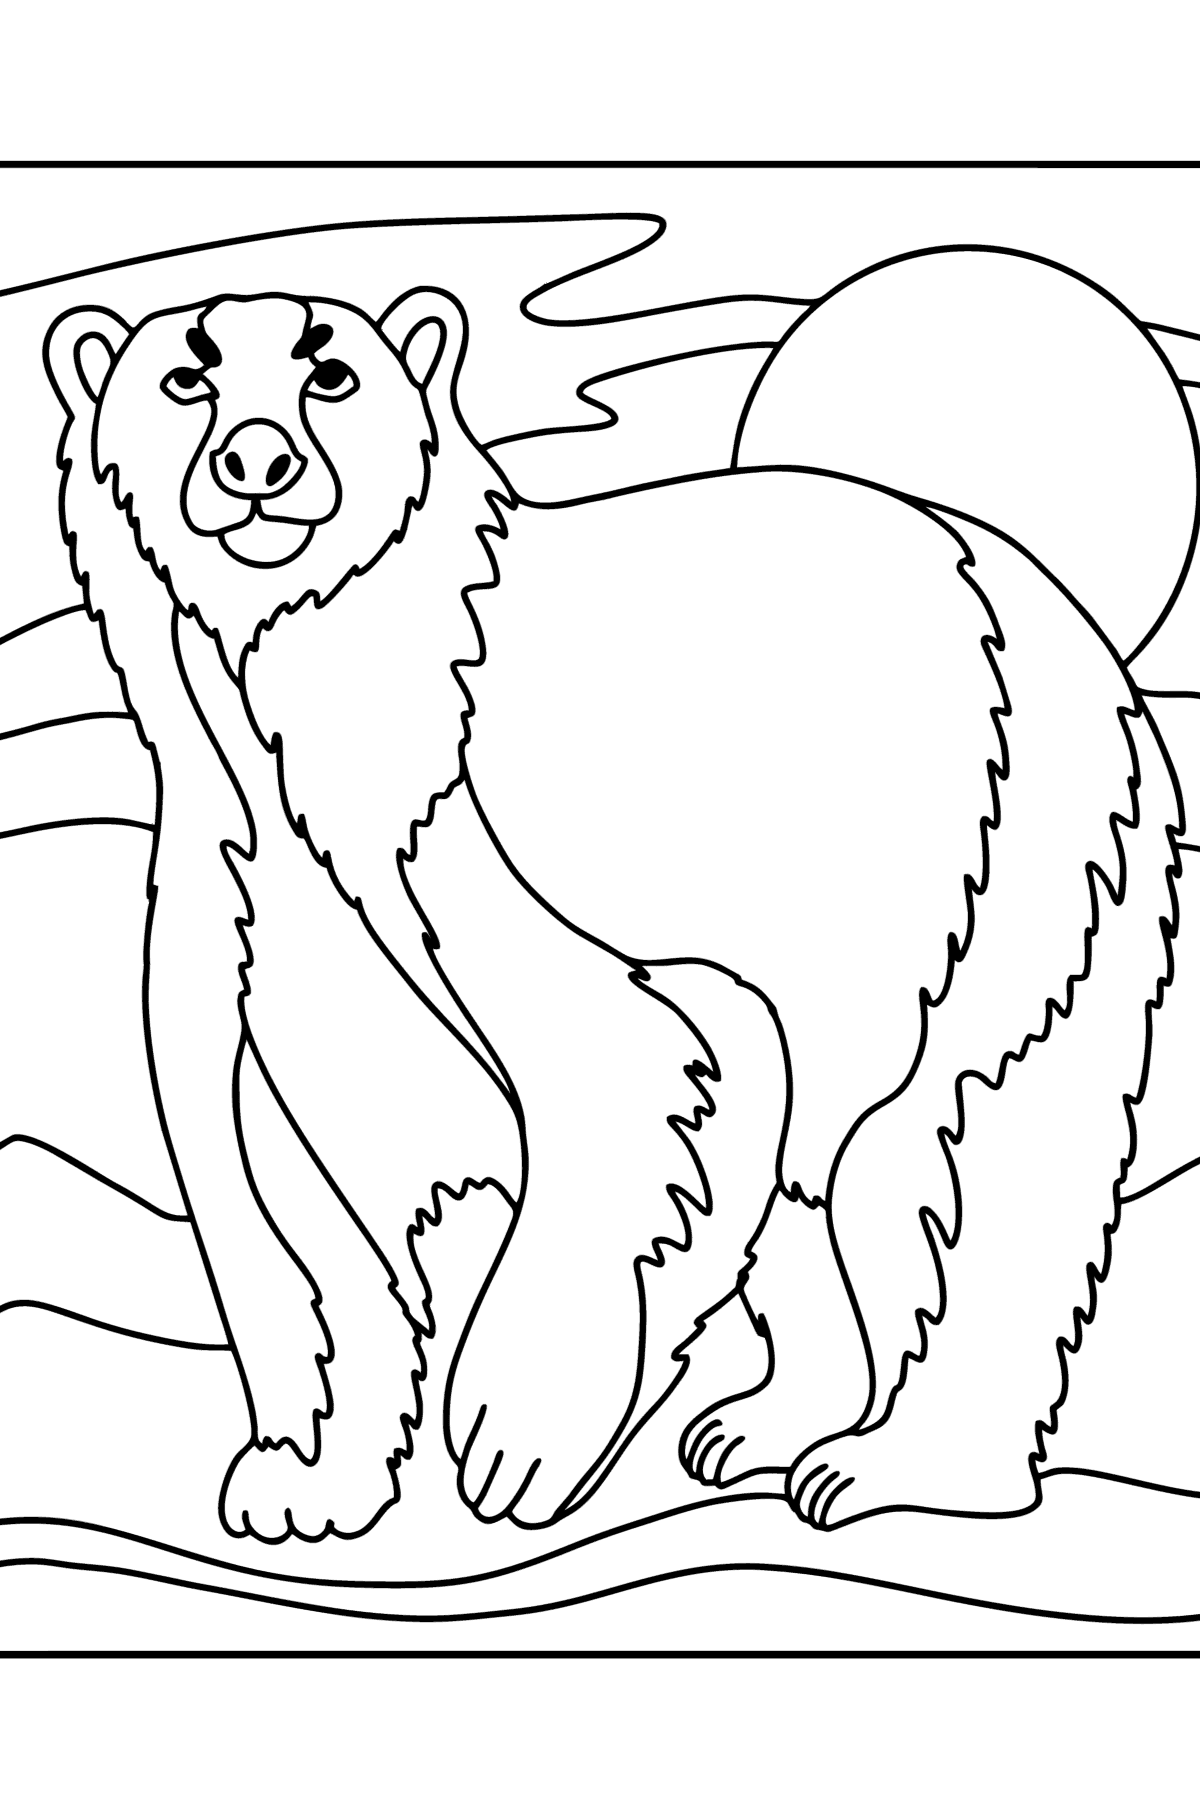 Polar bear coloring page - Coloring Pages for Kids